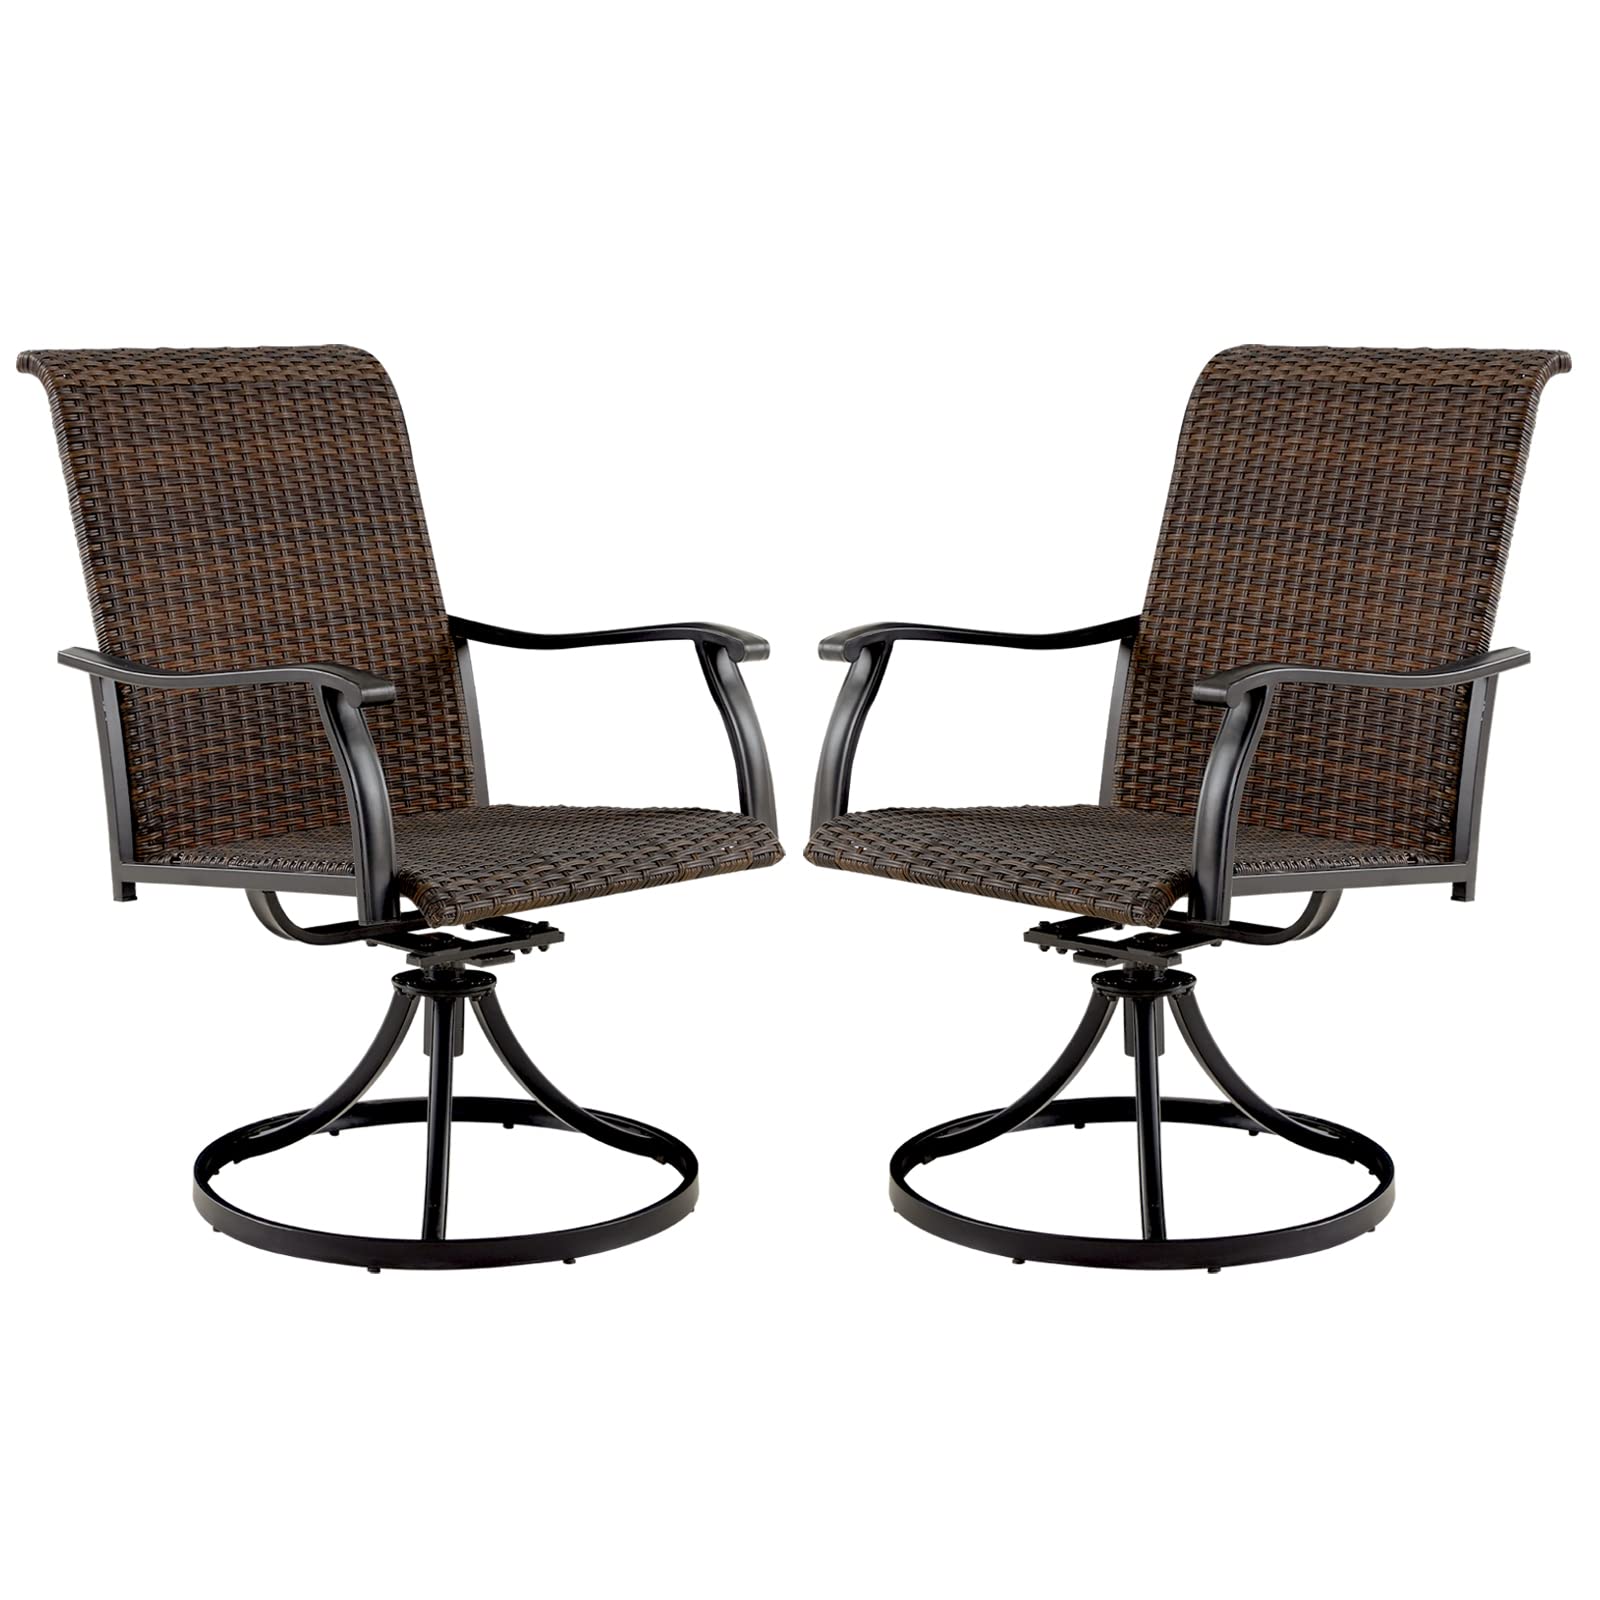 Vicllax Patio Rattan Dining Chairs, Outdoor Swivel Rattan Chairs with Armrest